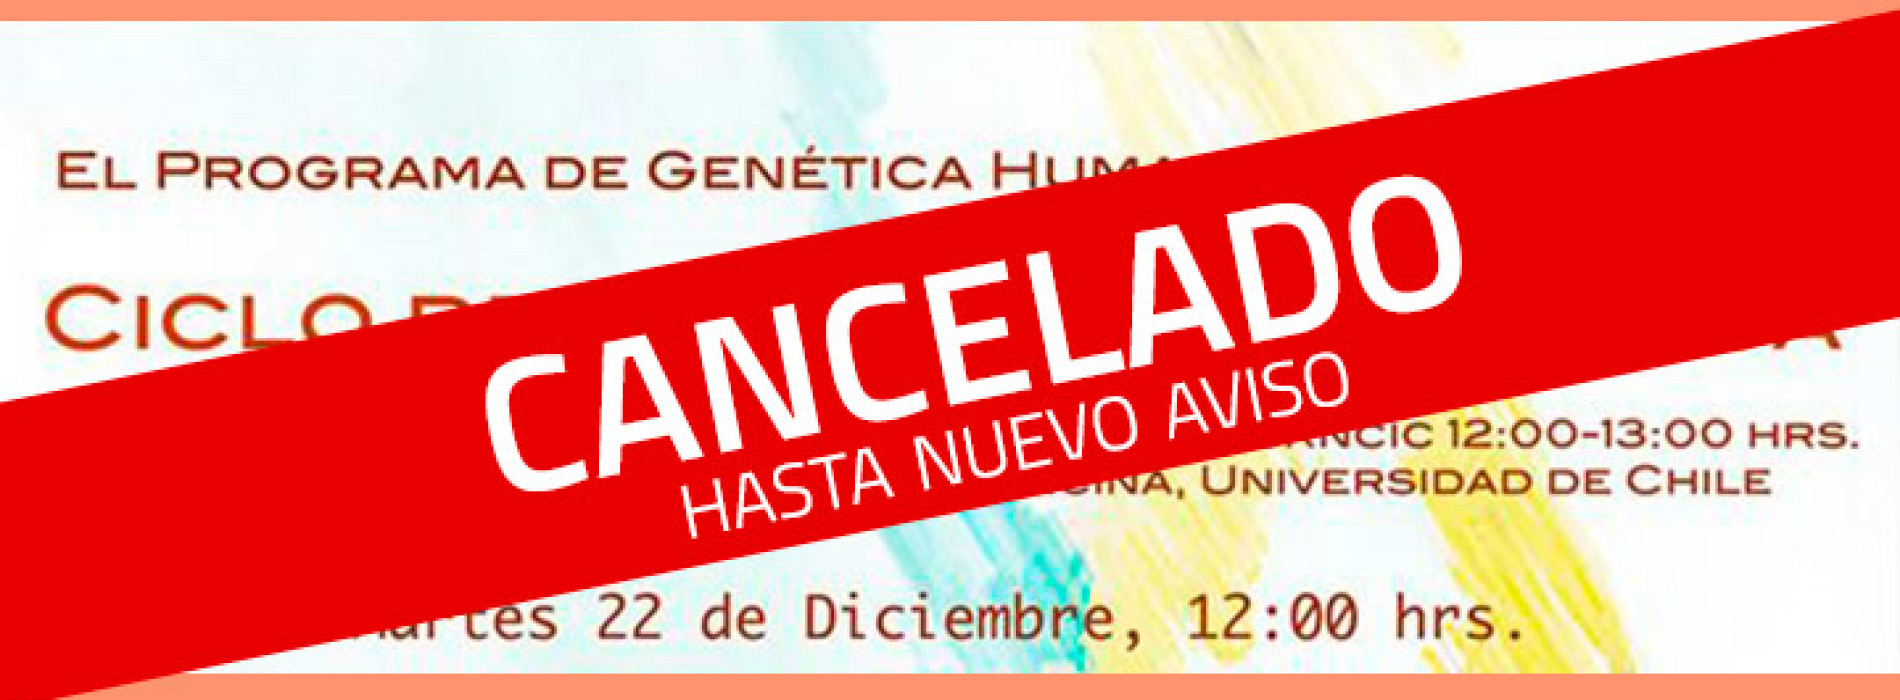 Cycle of lectures in genetics - CANCELLED